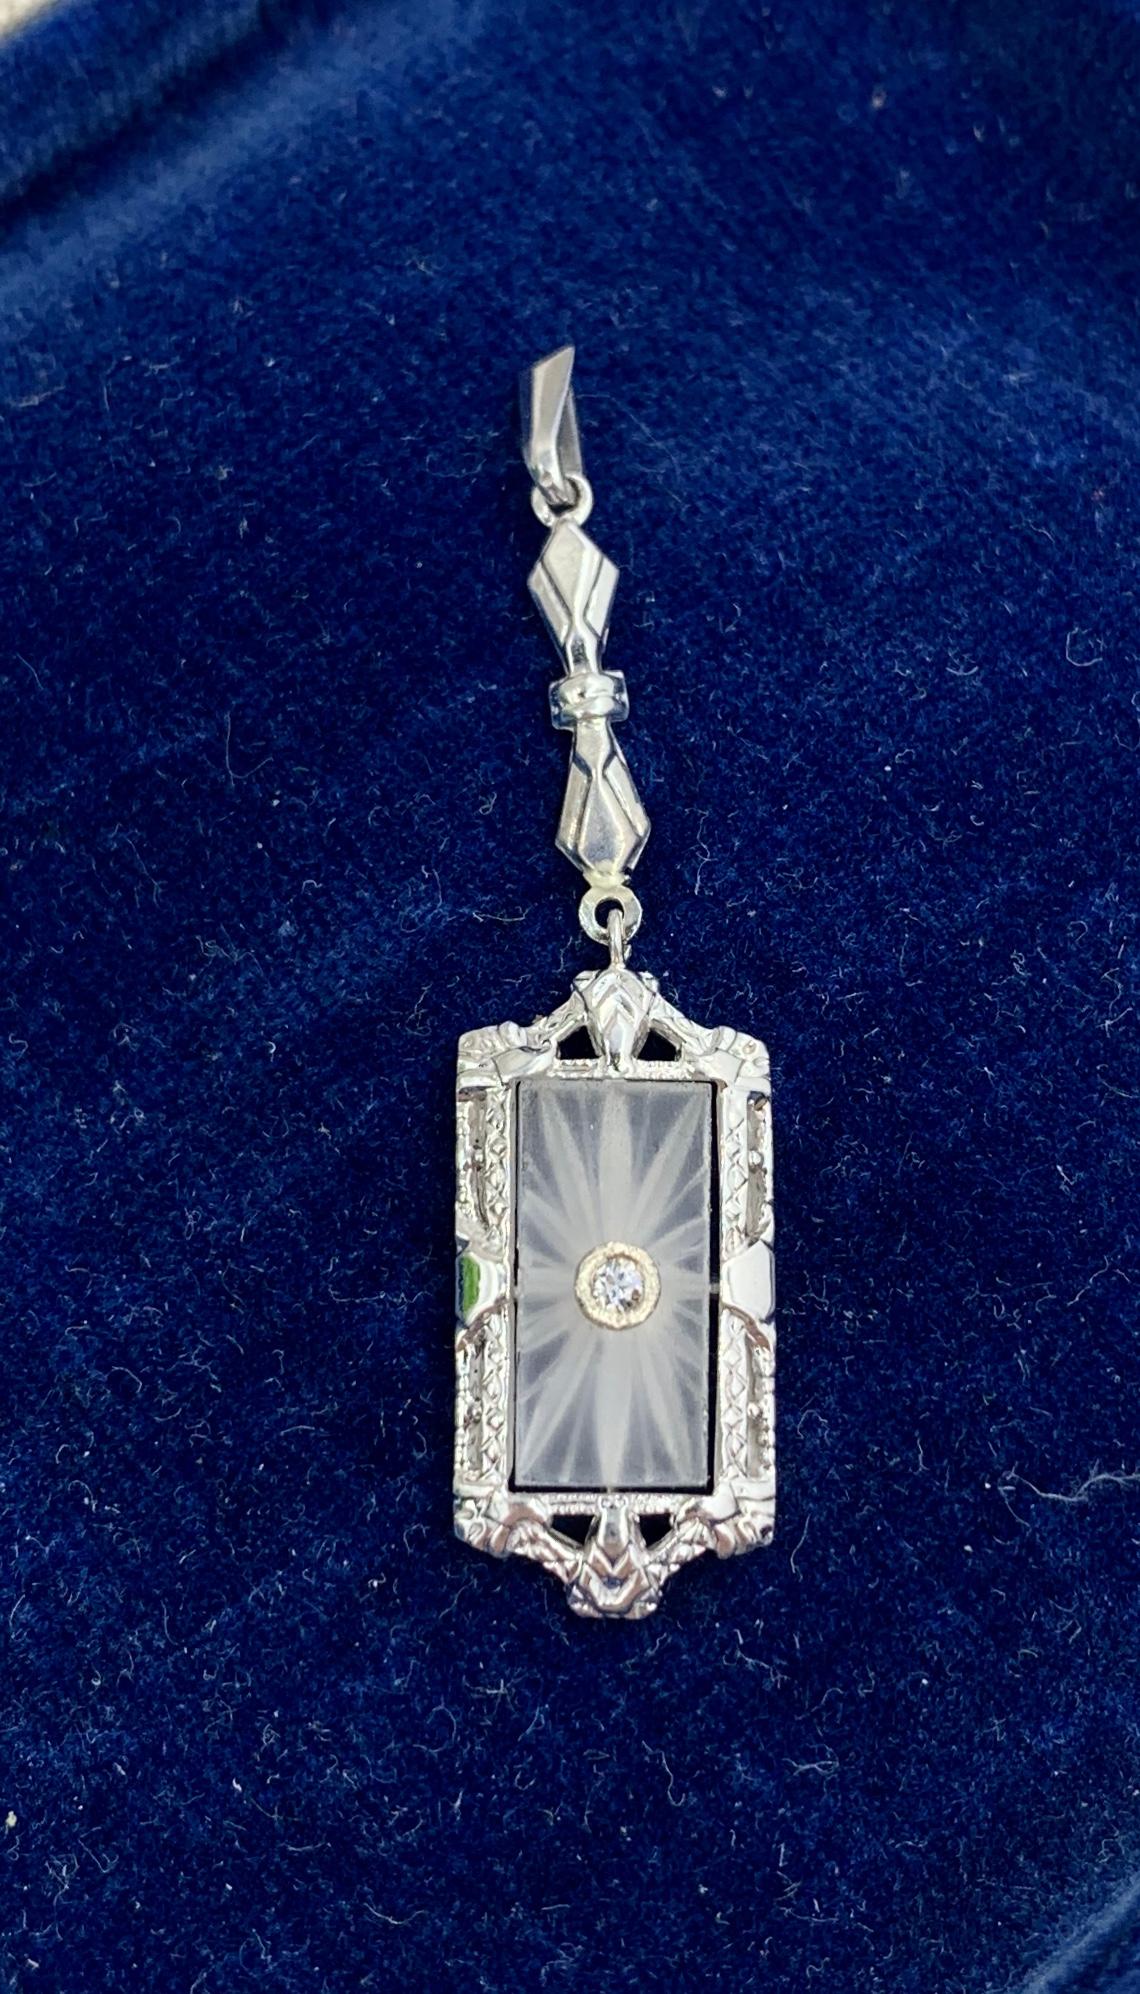 This is a very special antique Edwardian, Art Deco pendant with a central panel of carved Rock Crystal with an Old Mine Cut Diamond in the center and and exquisite engraved garland motif design in 14 Karat White Gold. 
This is one of the most